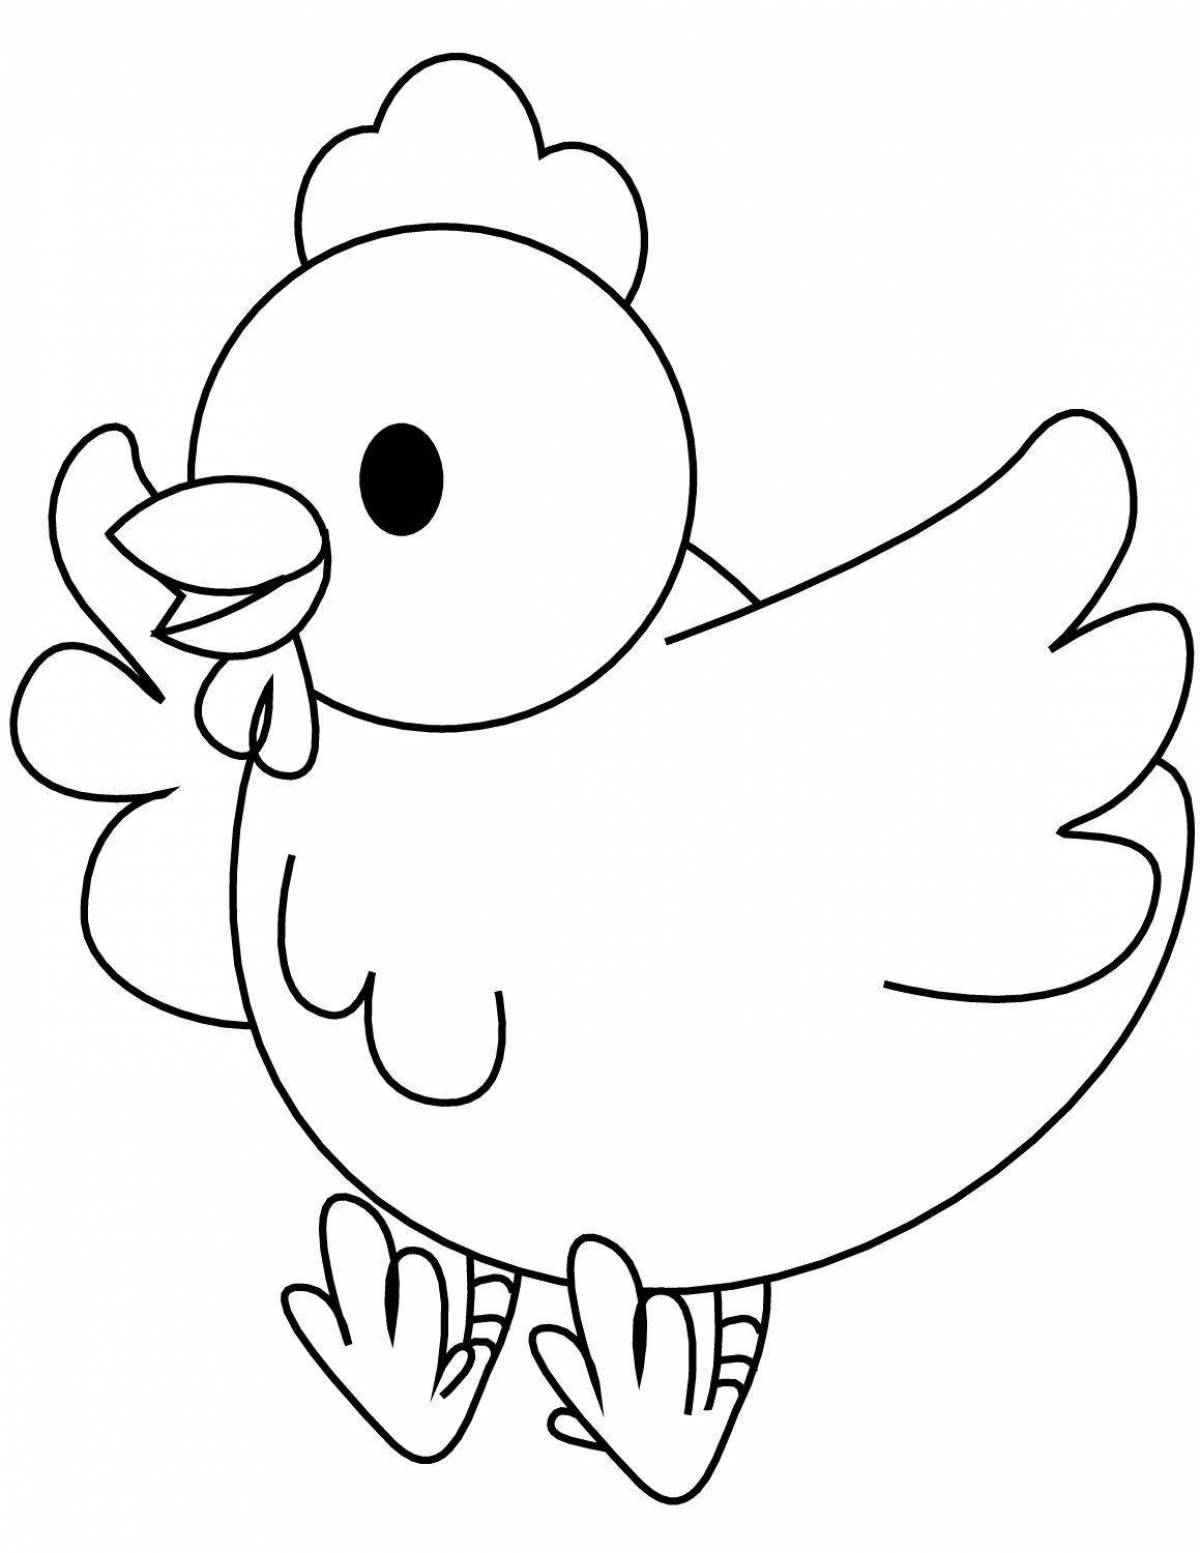 Chicken live coloring for preschoolers 2-3 years old